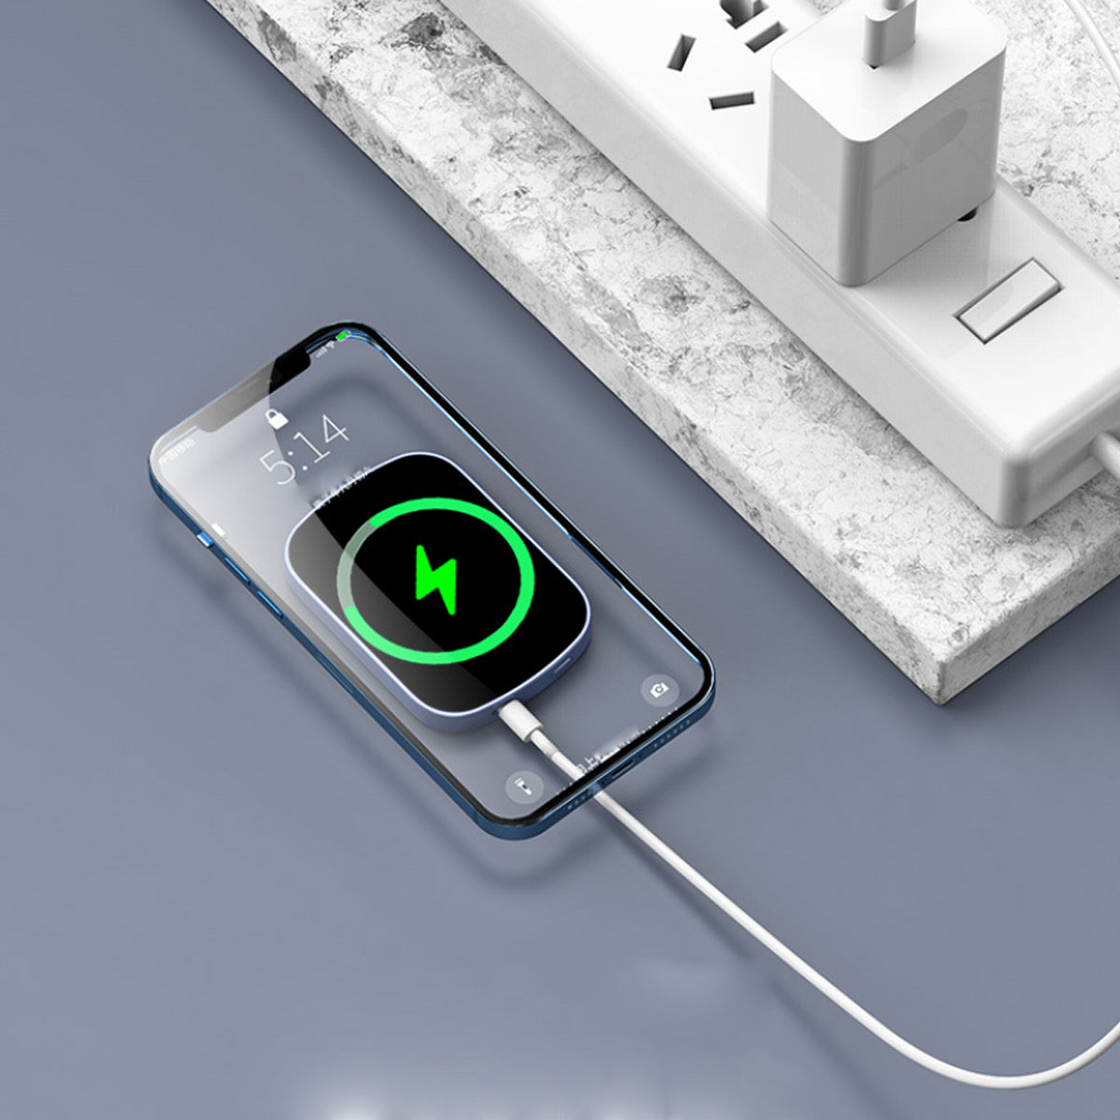 Chargomate Magnetic Portable Wireless Charger And Power Bank For Apple And Android